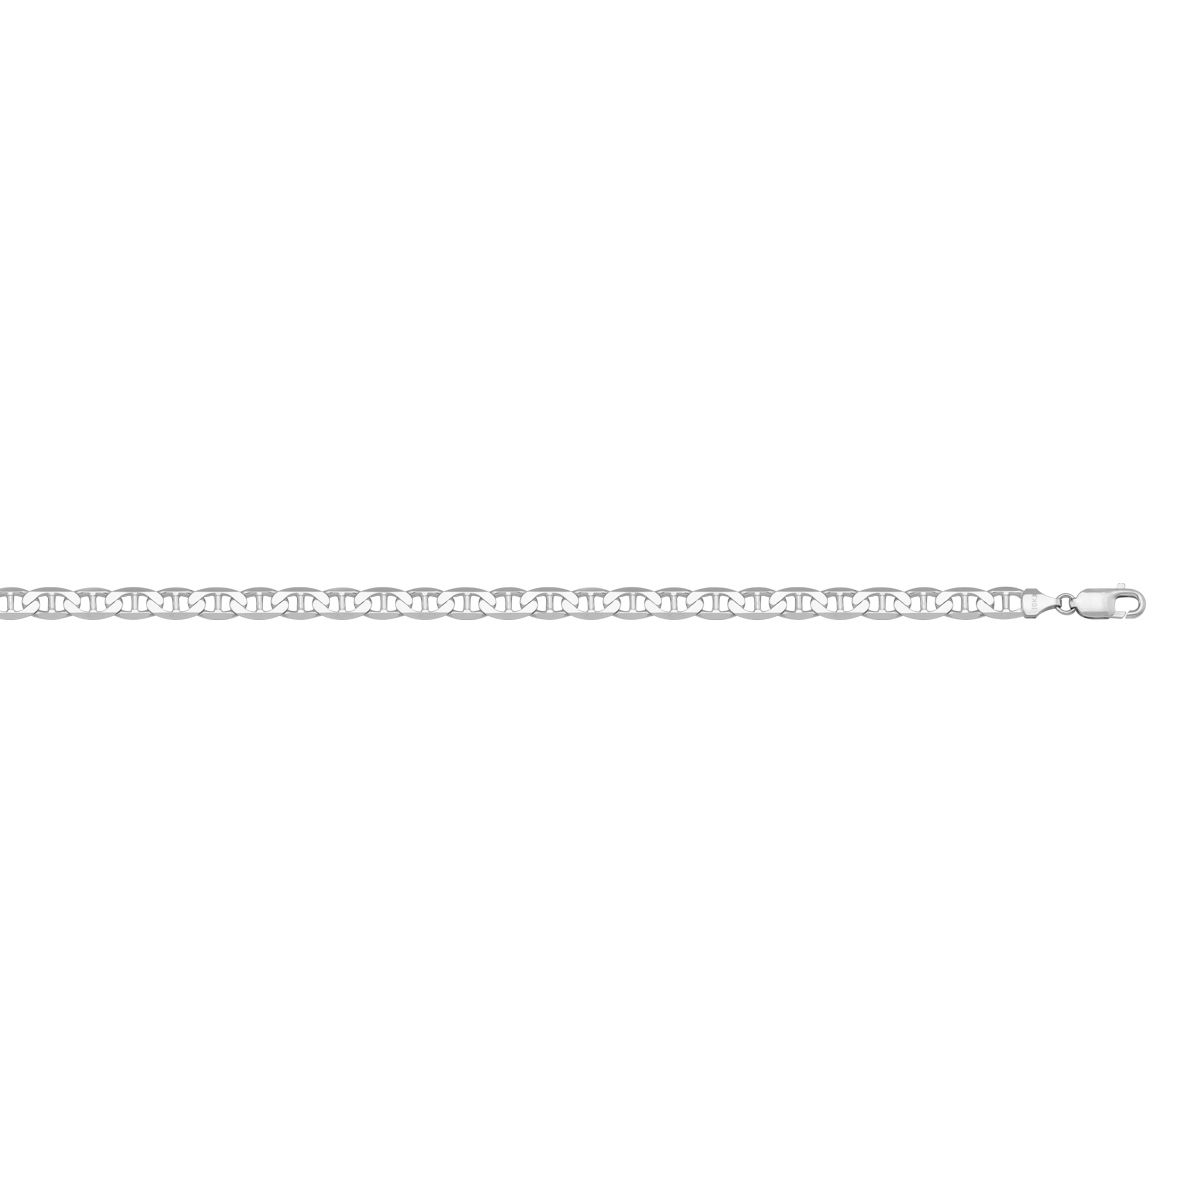 CANC04, Gold Chain, Flat Anchor, White Gold, 2.0 to 3.6 mm